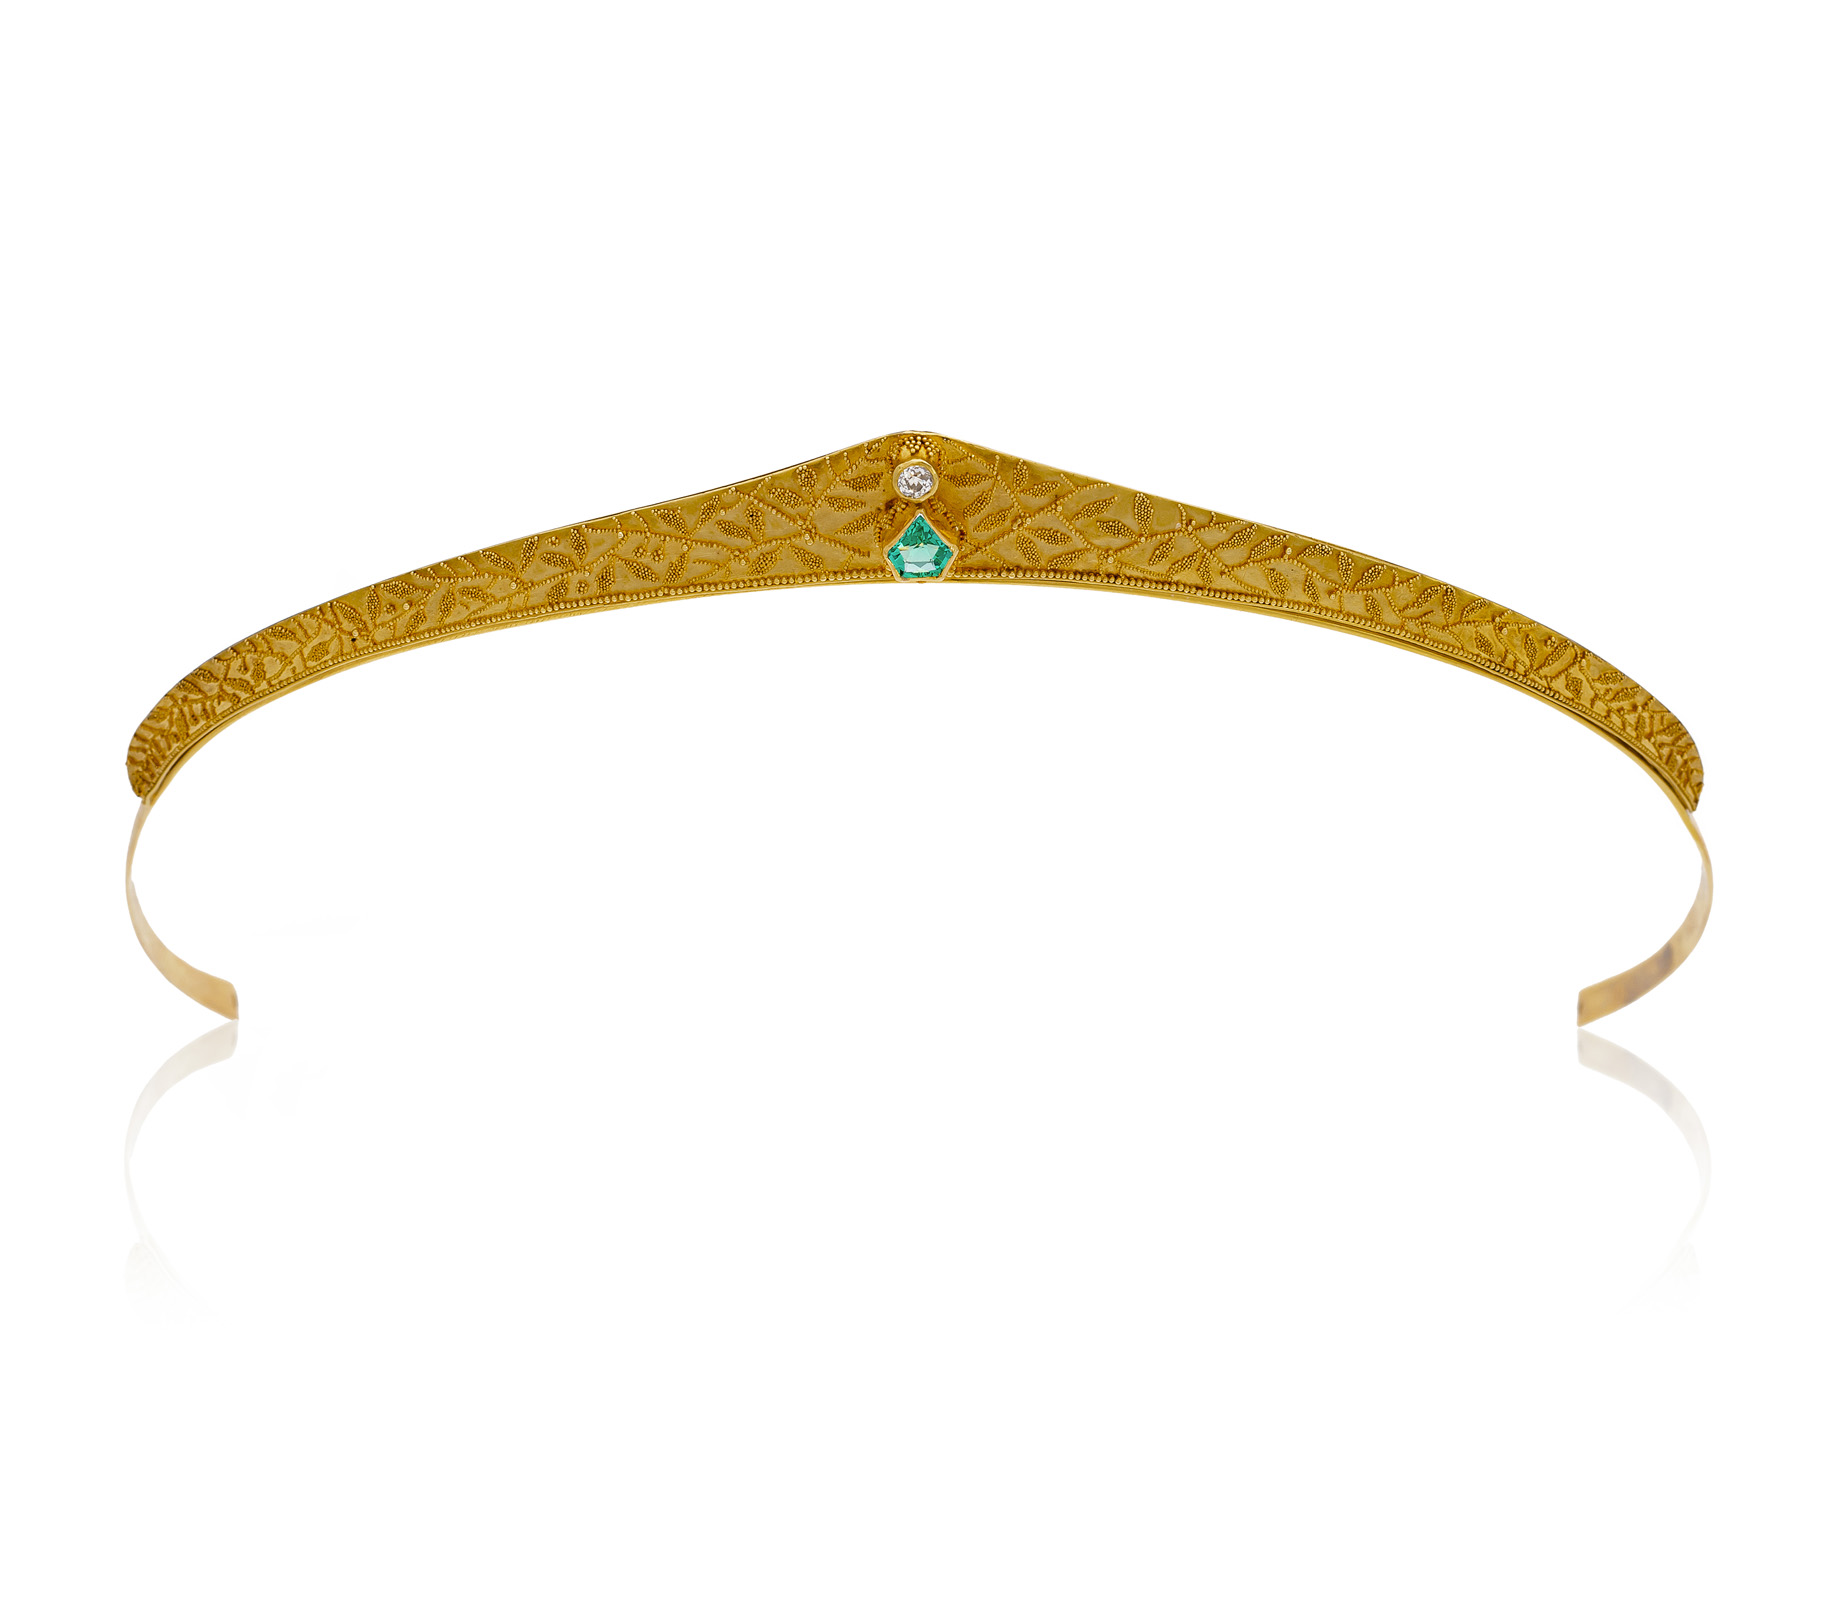 A FINE ANTIQUE-STYLE DIAMOND AND EMERALD SET GOLD TIARA WITH FINE GRANULATION - Image 8 of 9